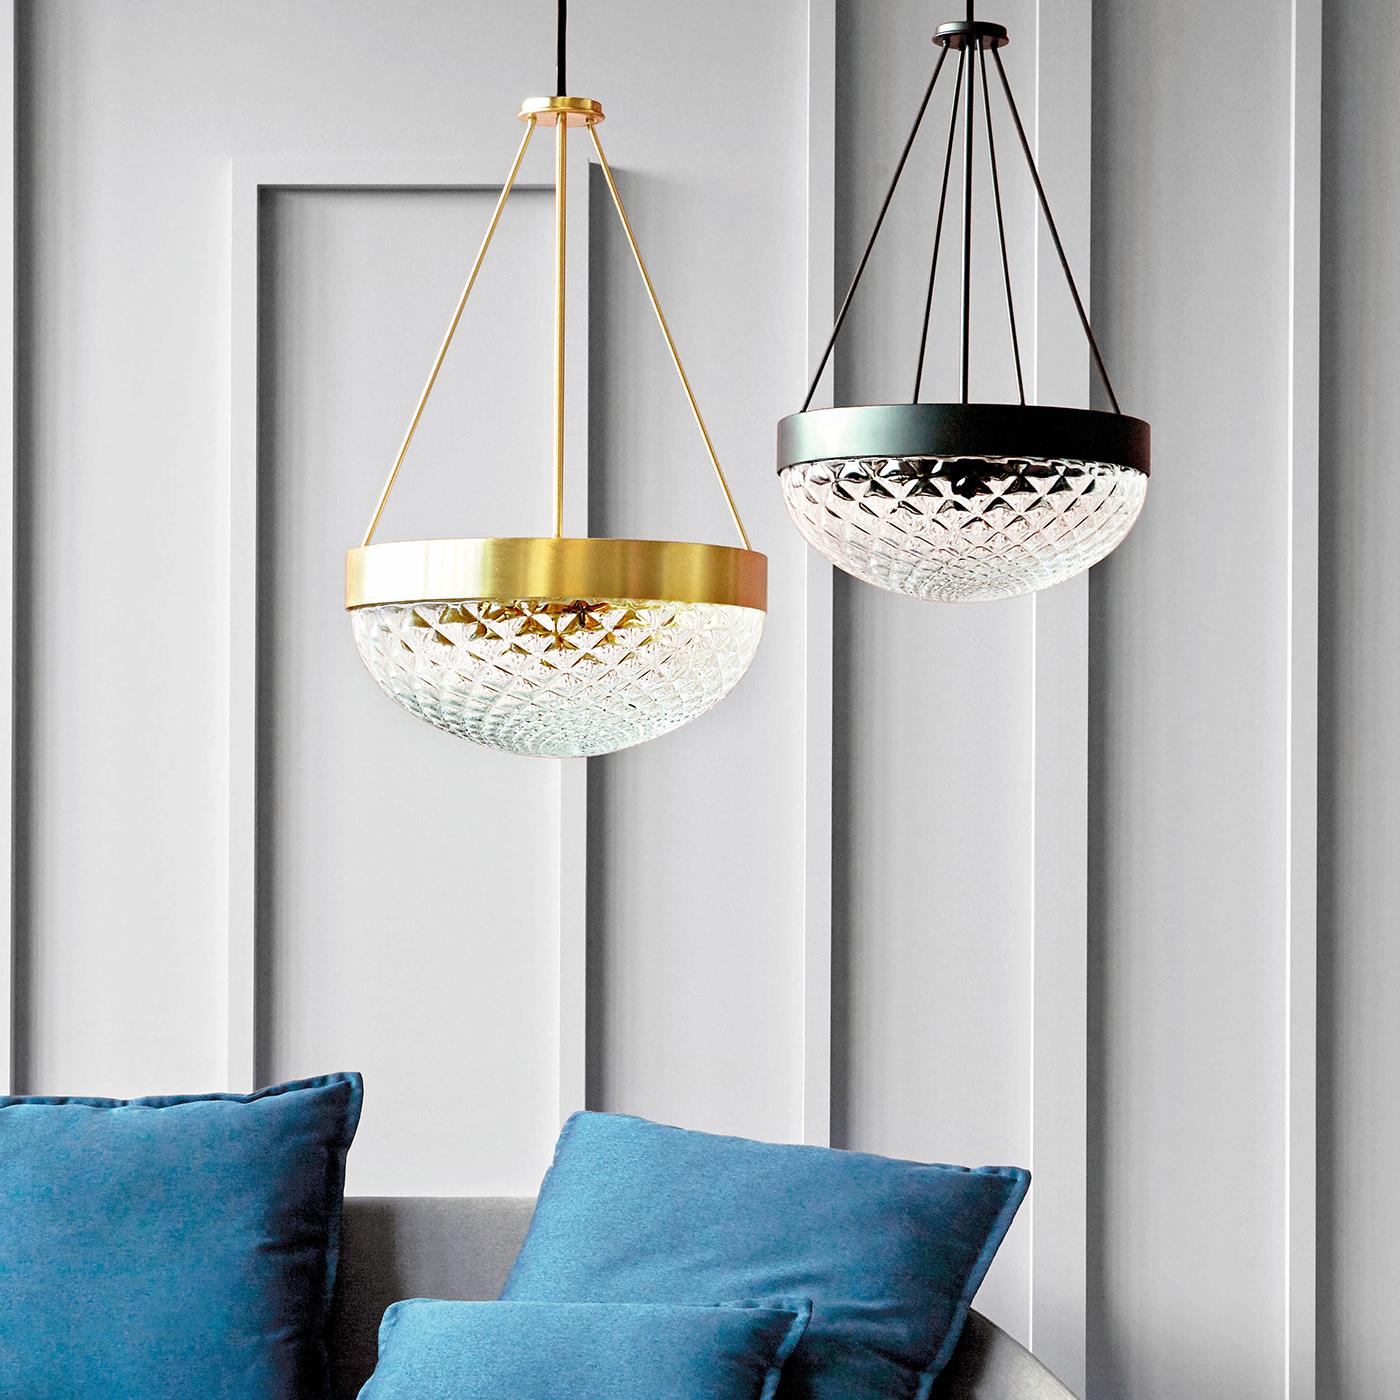 Suitable as a table lamp or pendant, this eye-catching piece by Matteo Zorzenoni develops the design of a traditional ceiling lamp's lampshade and reinterprets it in a captivating, contemporary key. Hosting three light bulbs, the lampshade is in